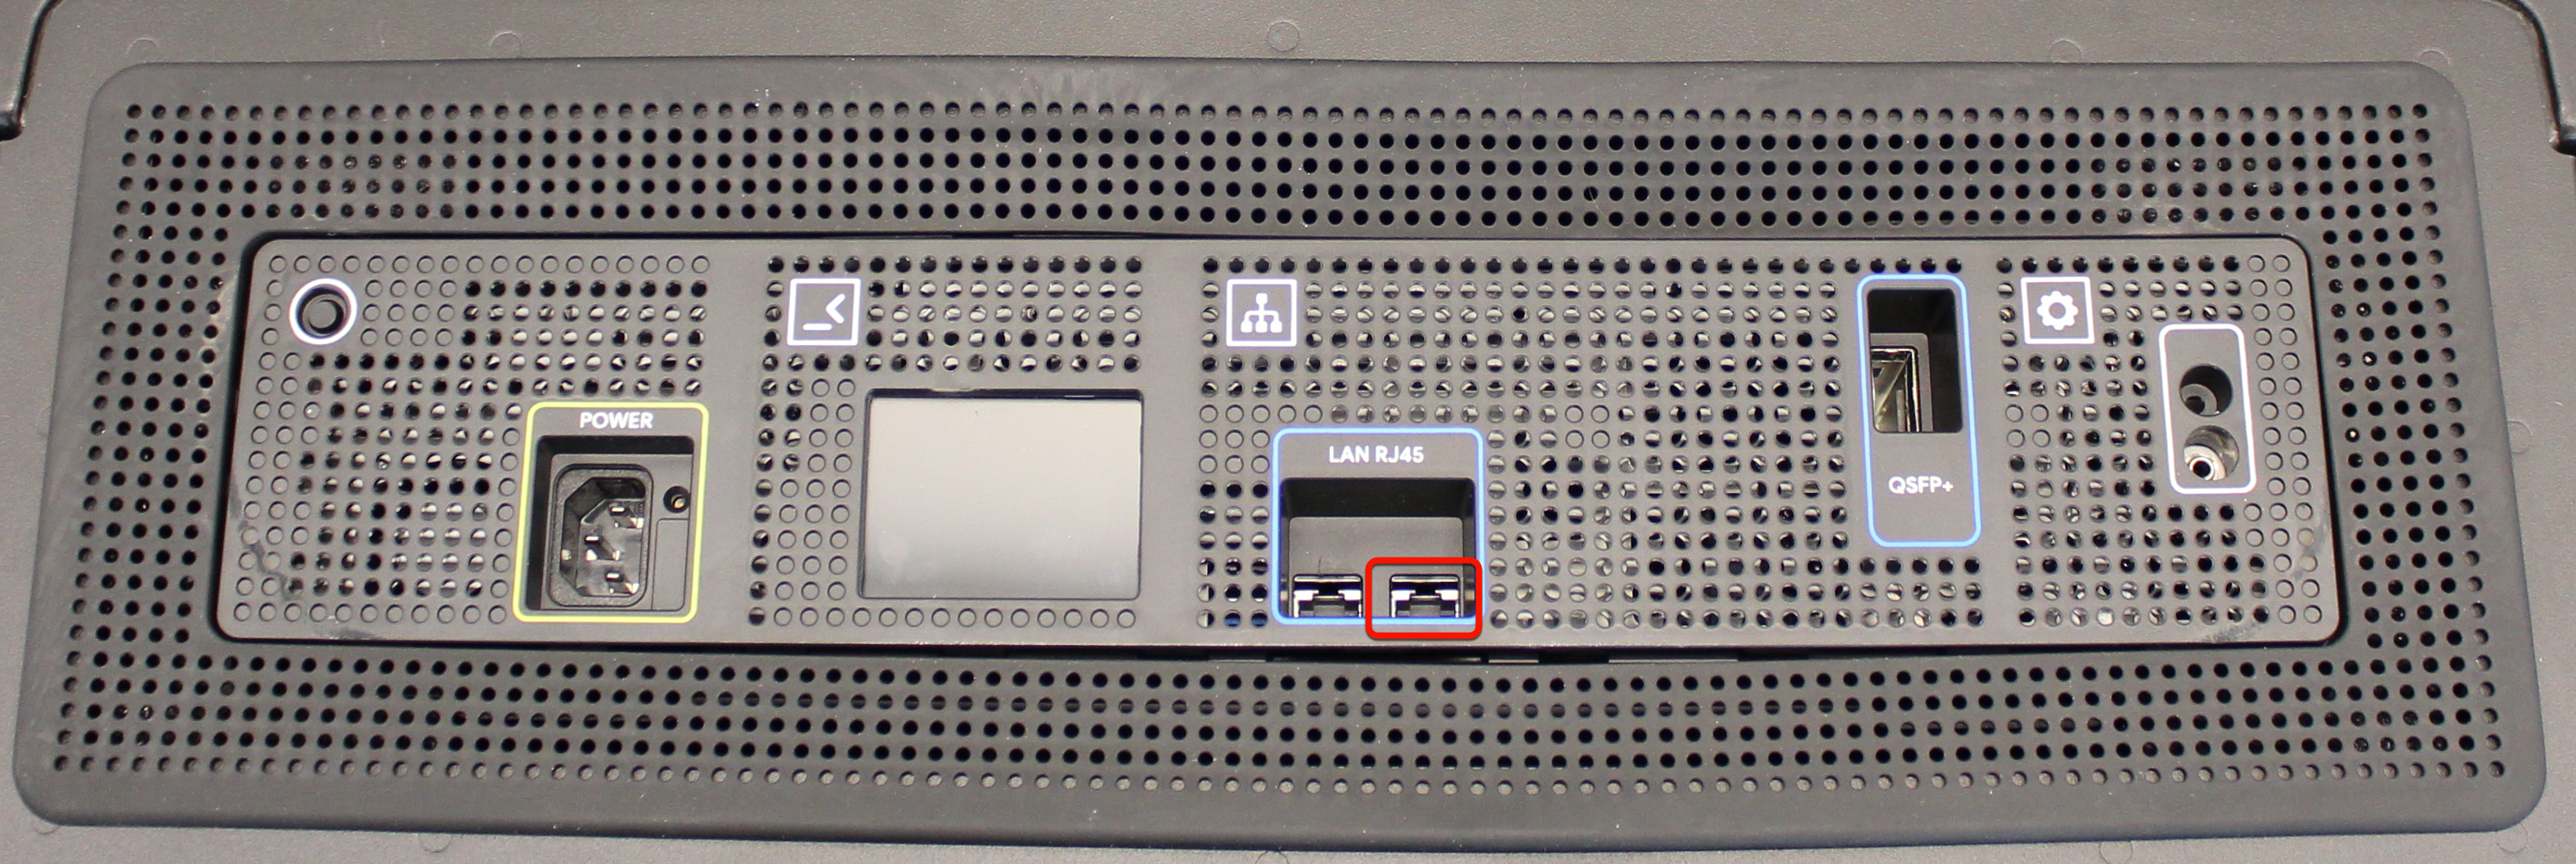 Right network port